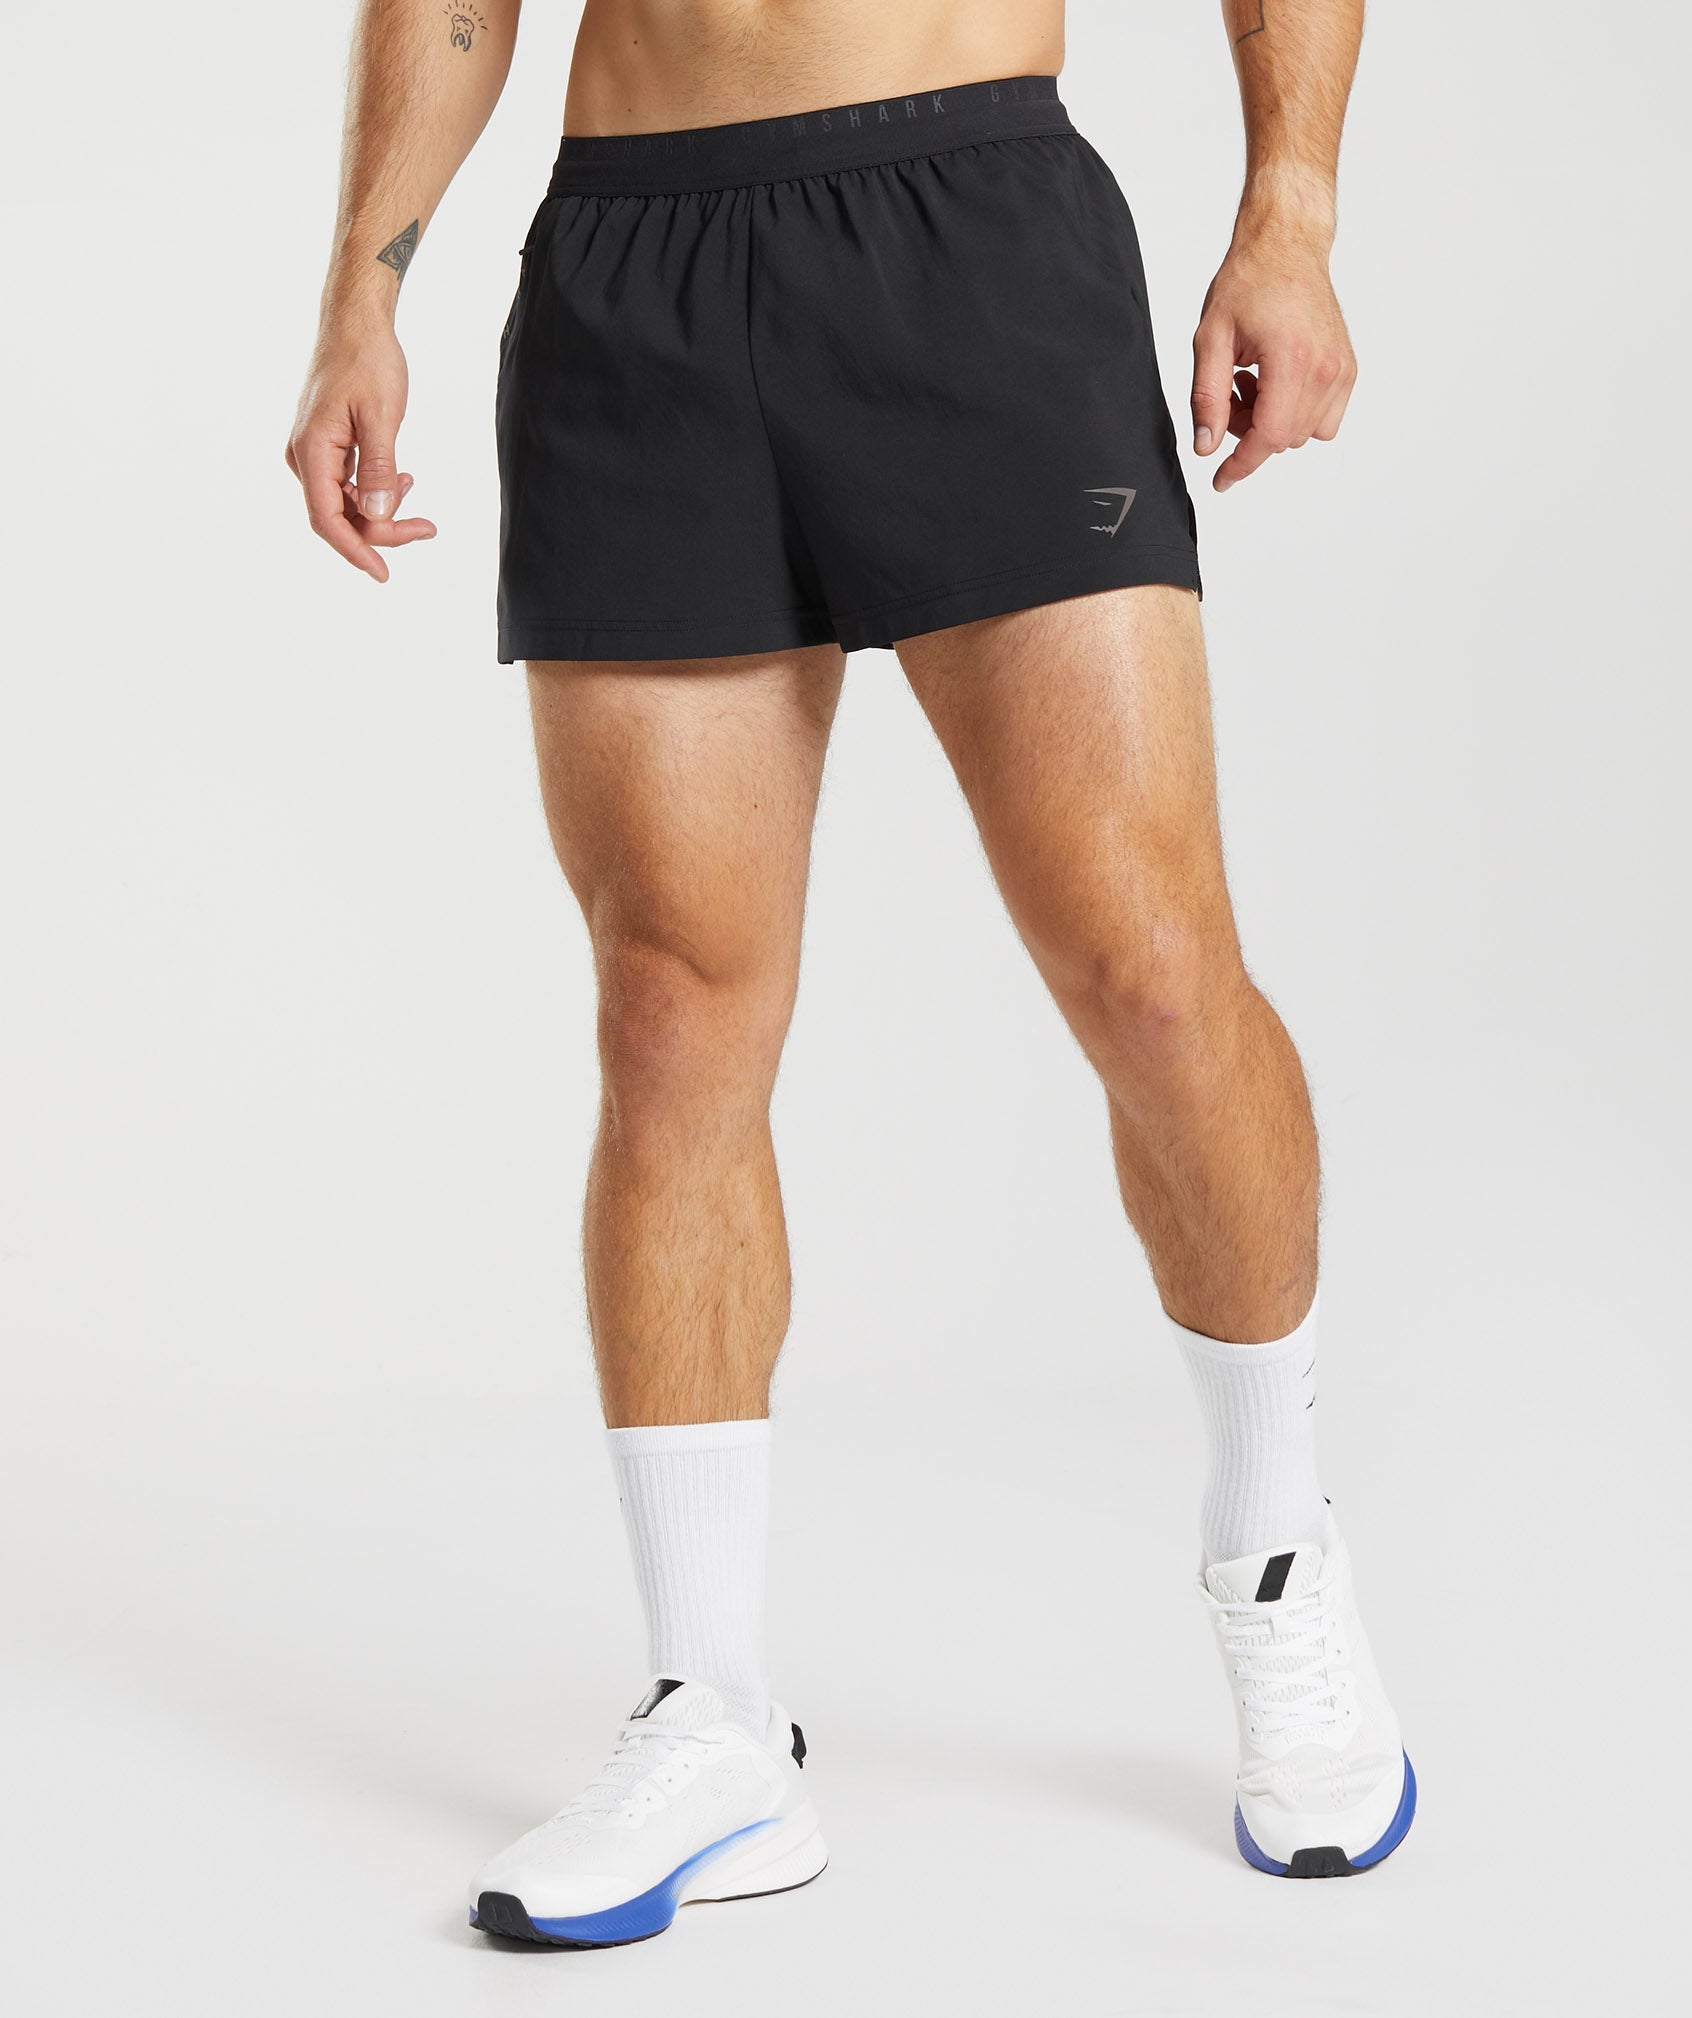 The Gym People's Lululemon Lookalike Running Shorts: On Sale for $24